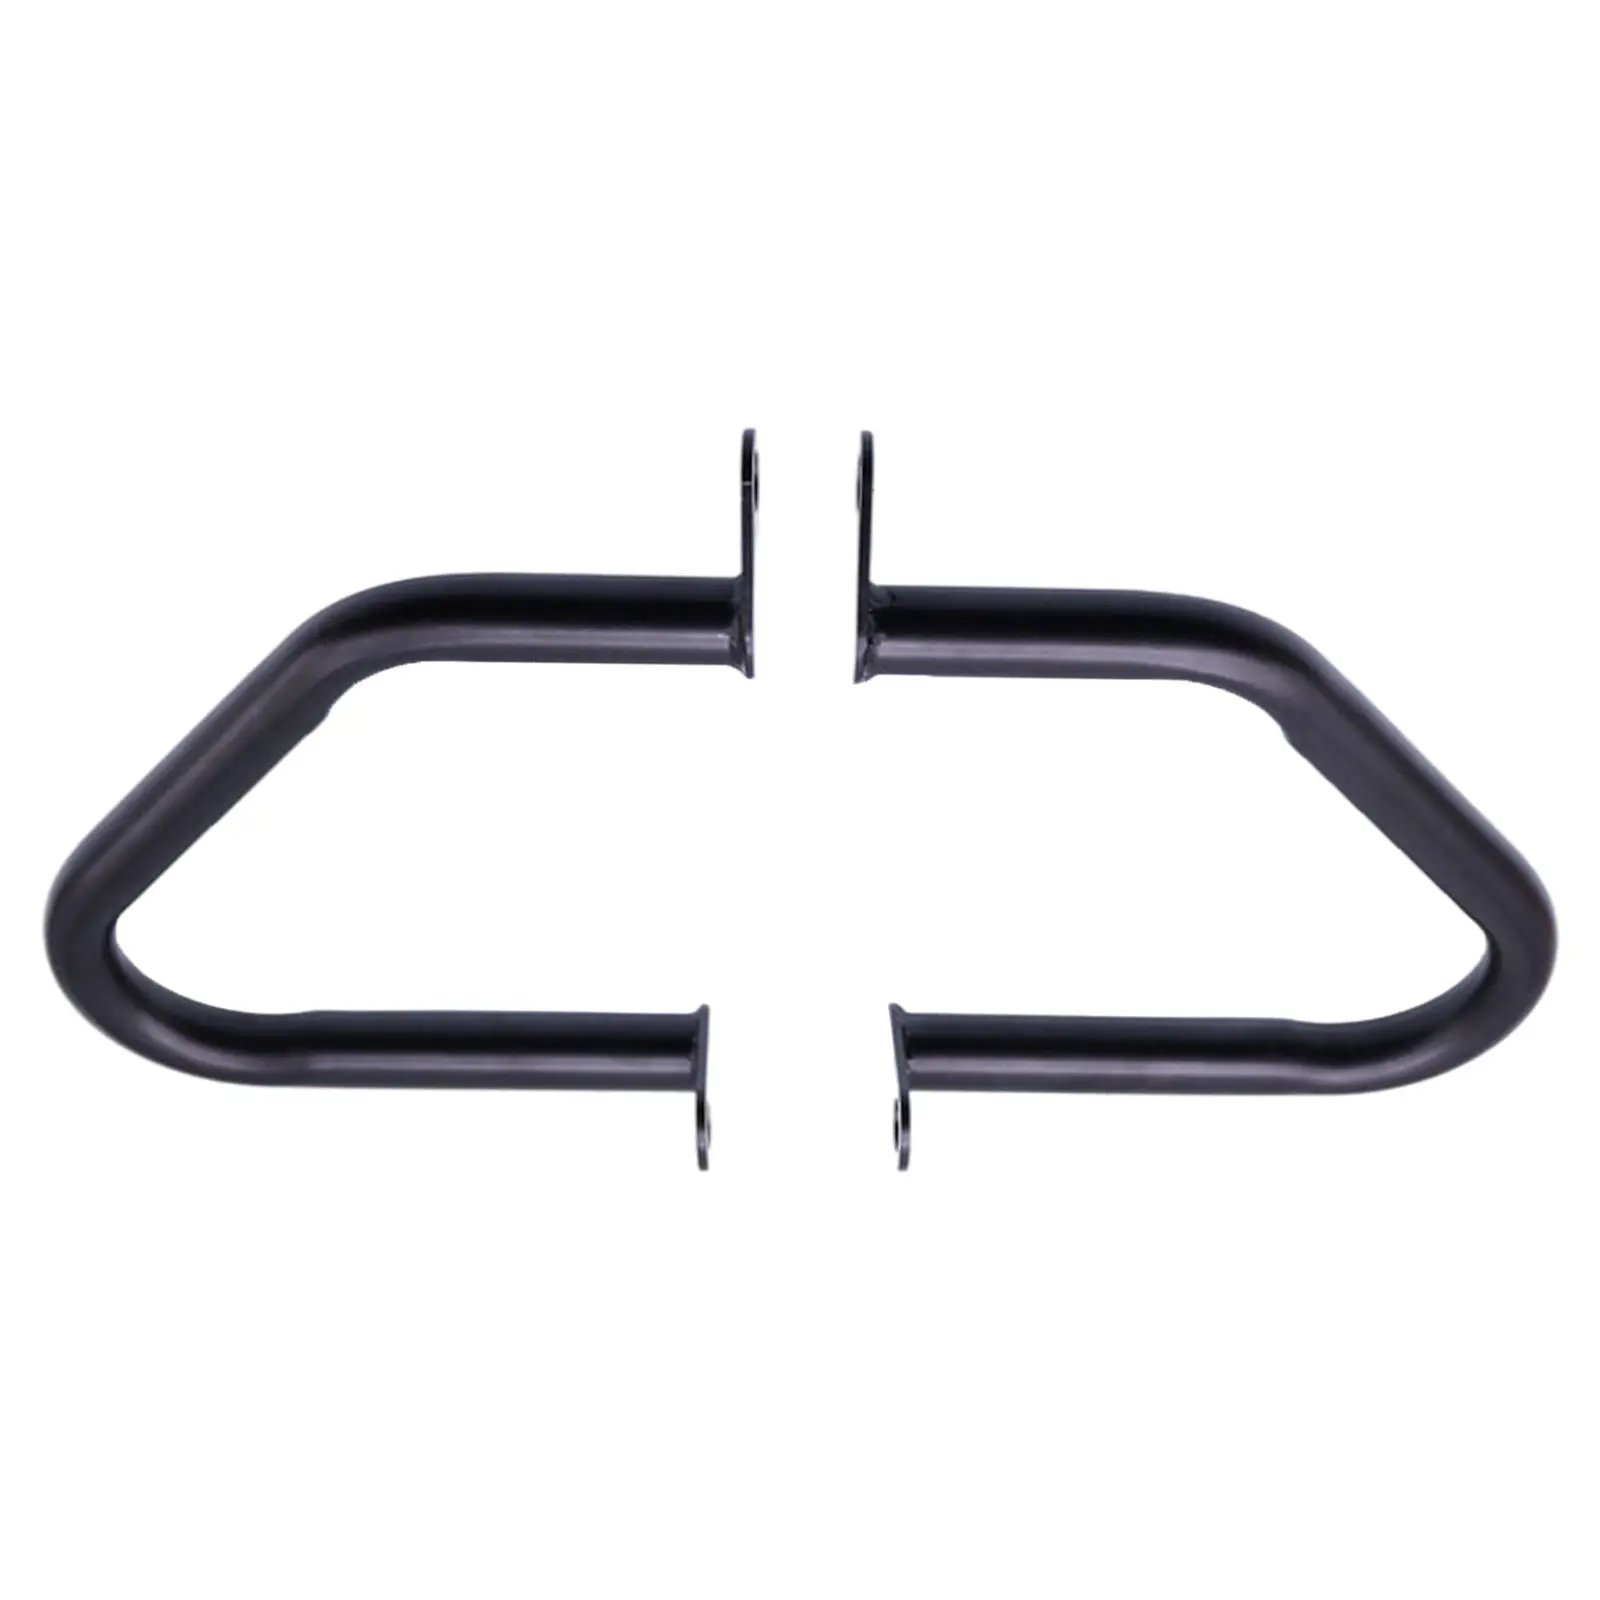 Steel Engine Guard Crash Bars Replacement fits for T120 Thruxton